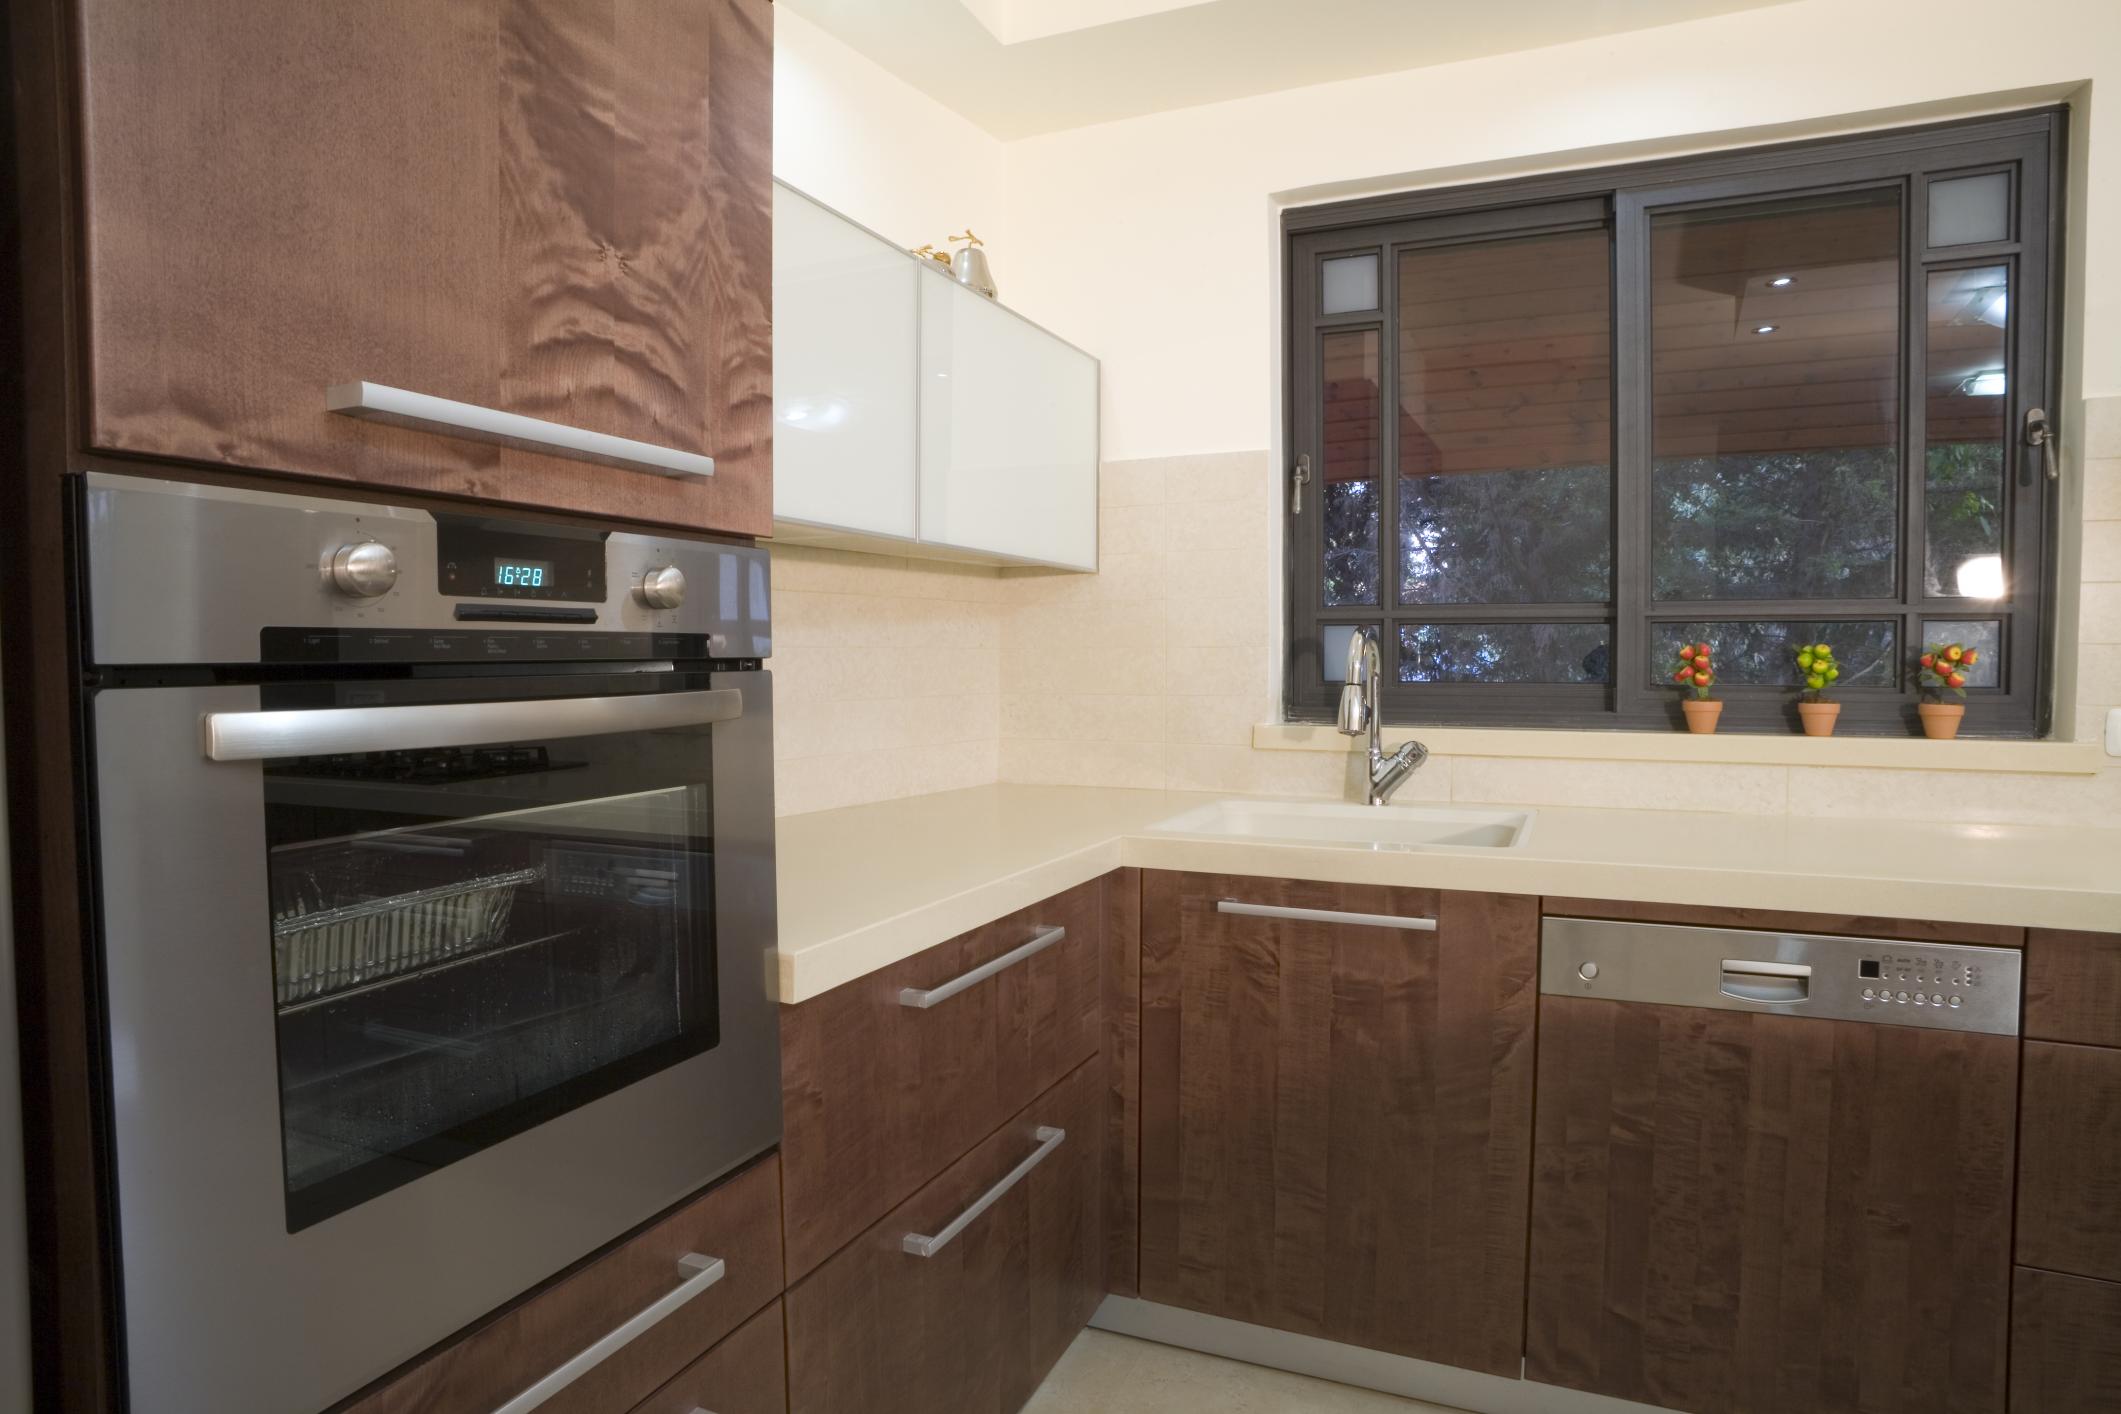 Refinishing & Repainting Services for Kitchen Cabinets